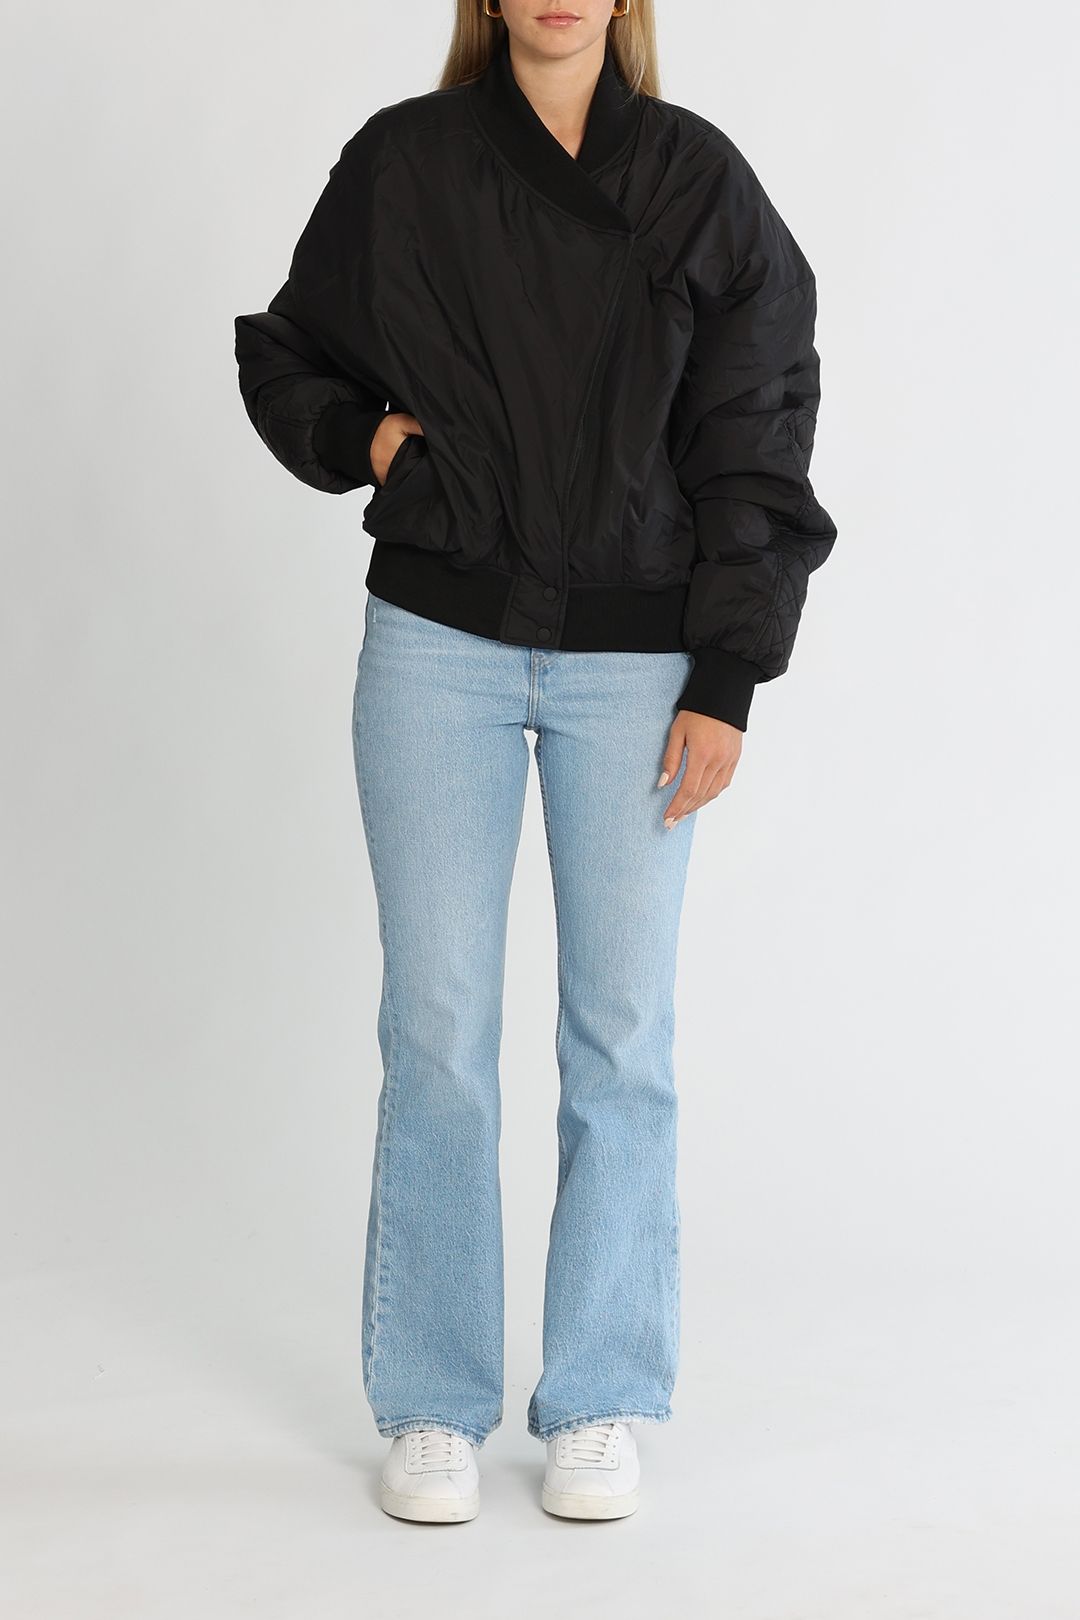 C&M Camilla and Marc Baltimore Padded Jacket Black